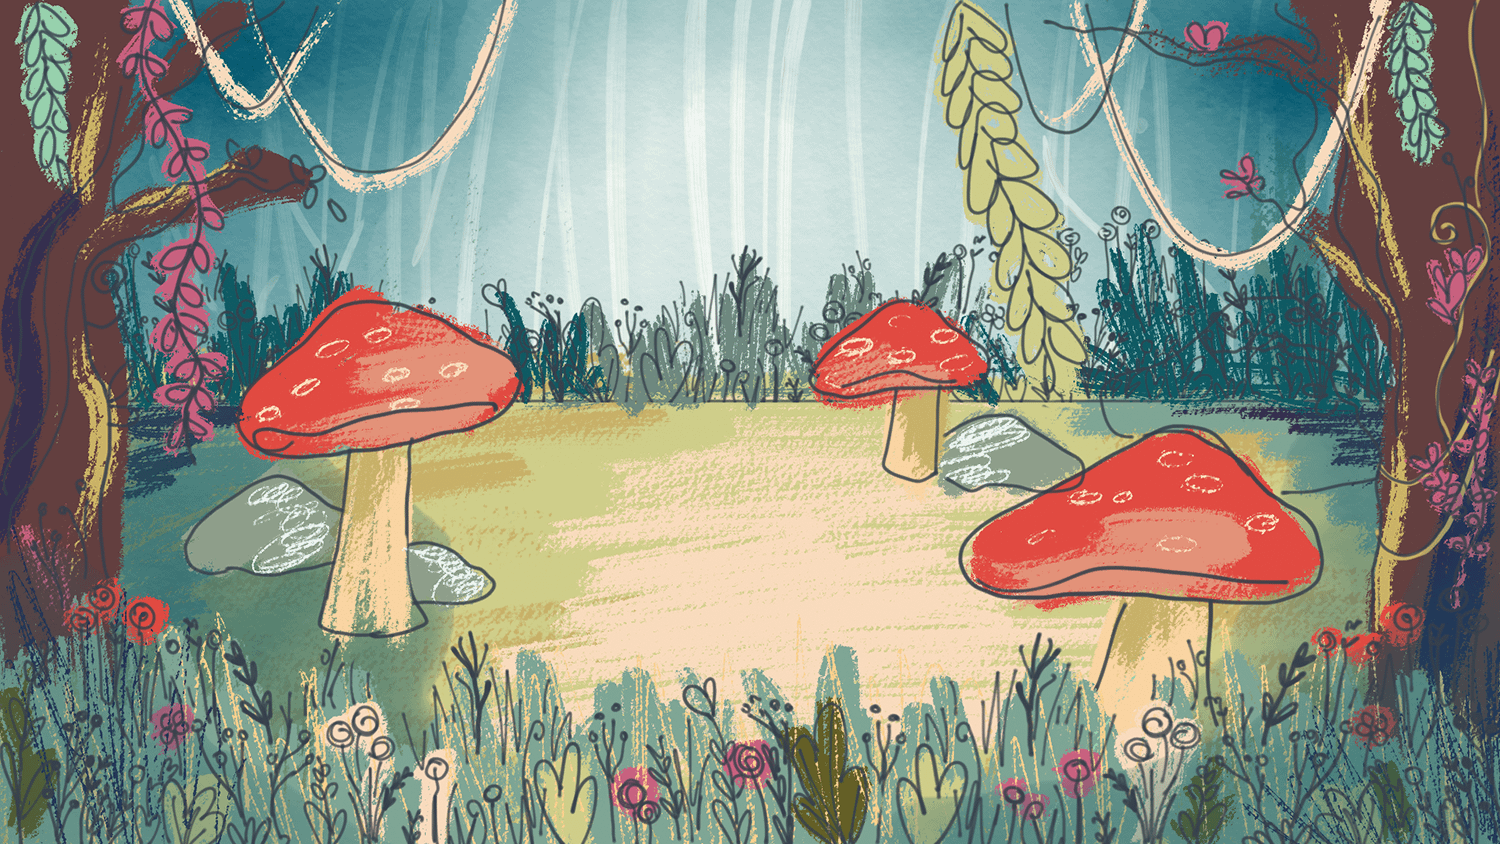 Mid-fidelity sketch of a forest environment with large mushrooms